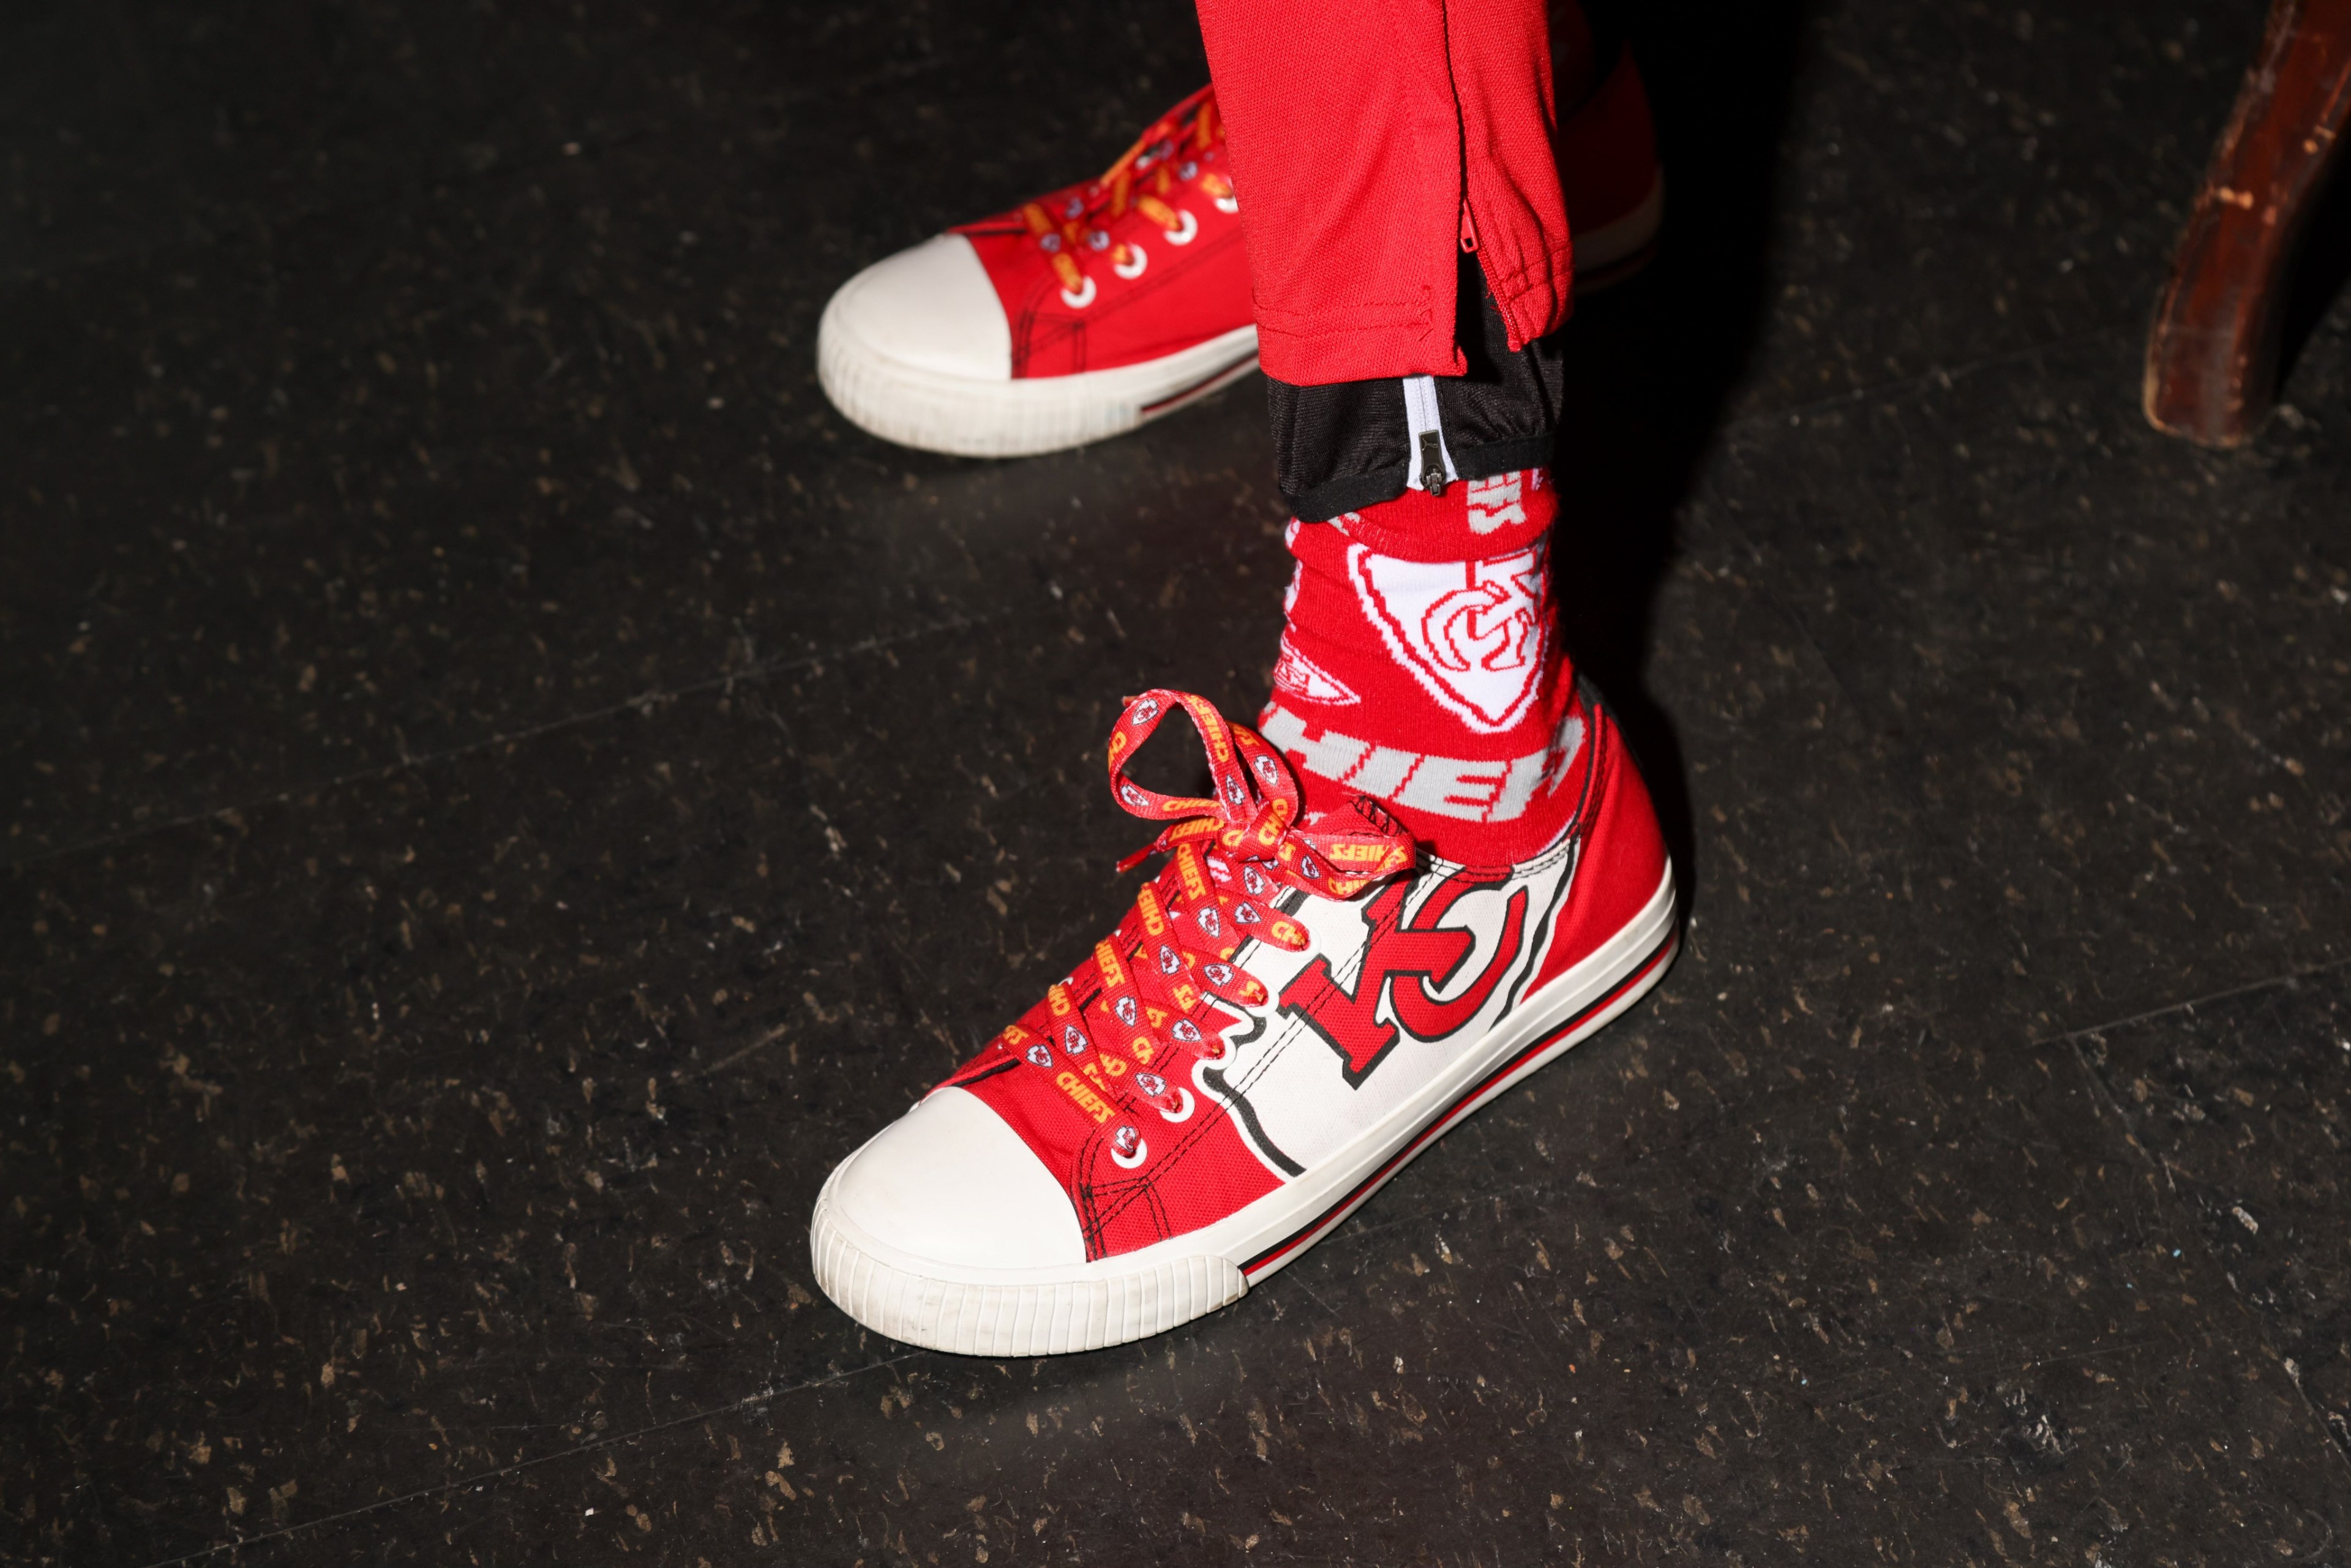 A fan sports white and red Kansas City Chiefs shoes and socks